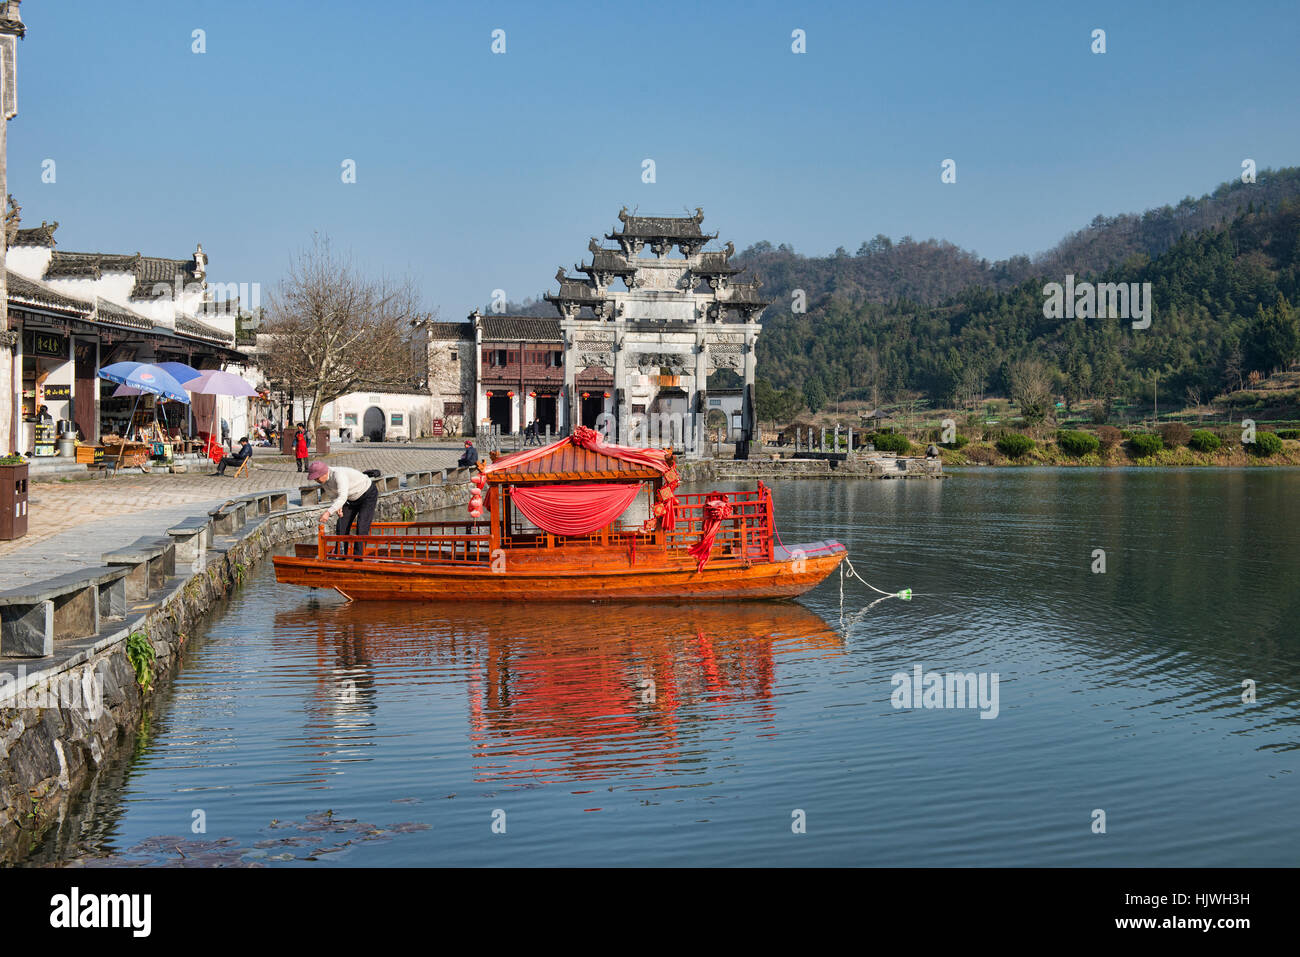 Boatman in the ancient village of Xidi, Anhui, China Stock Photo